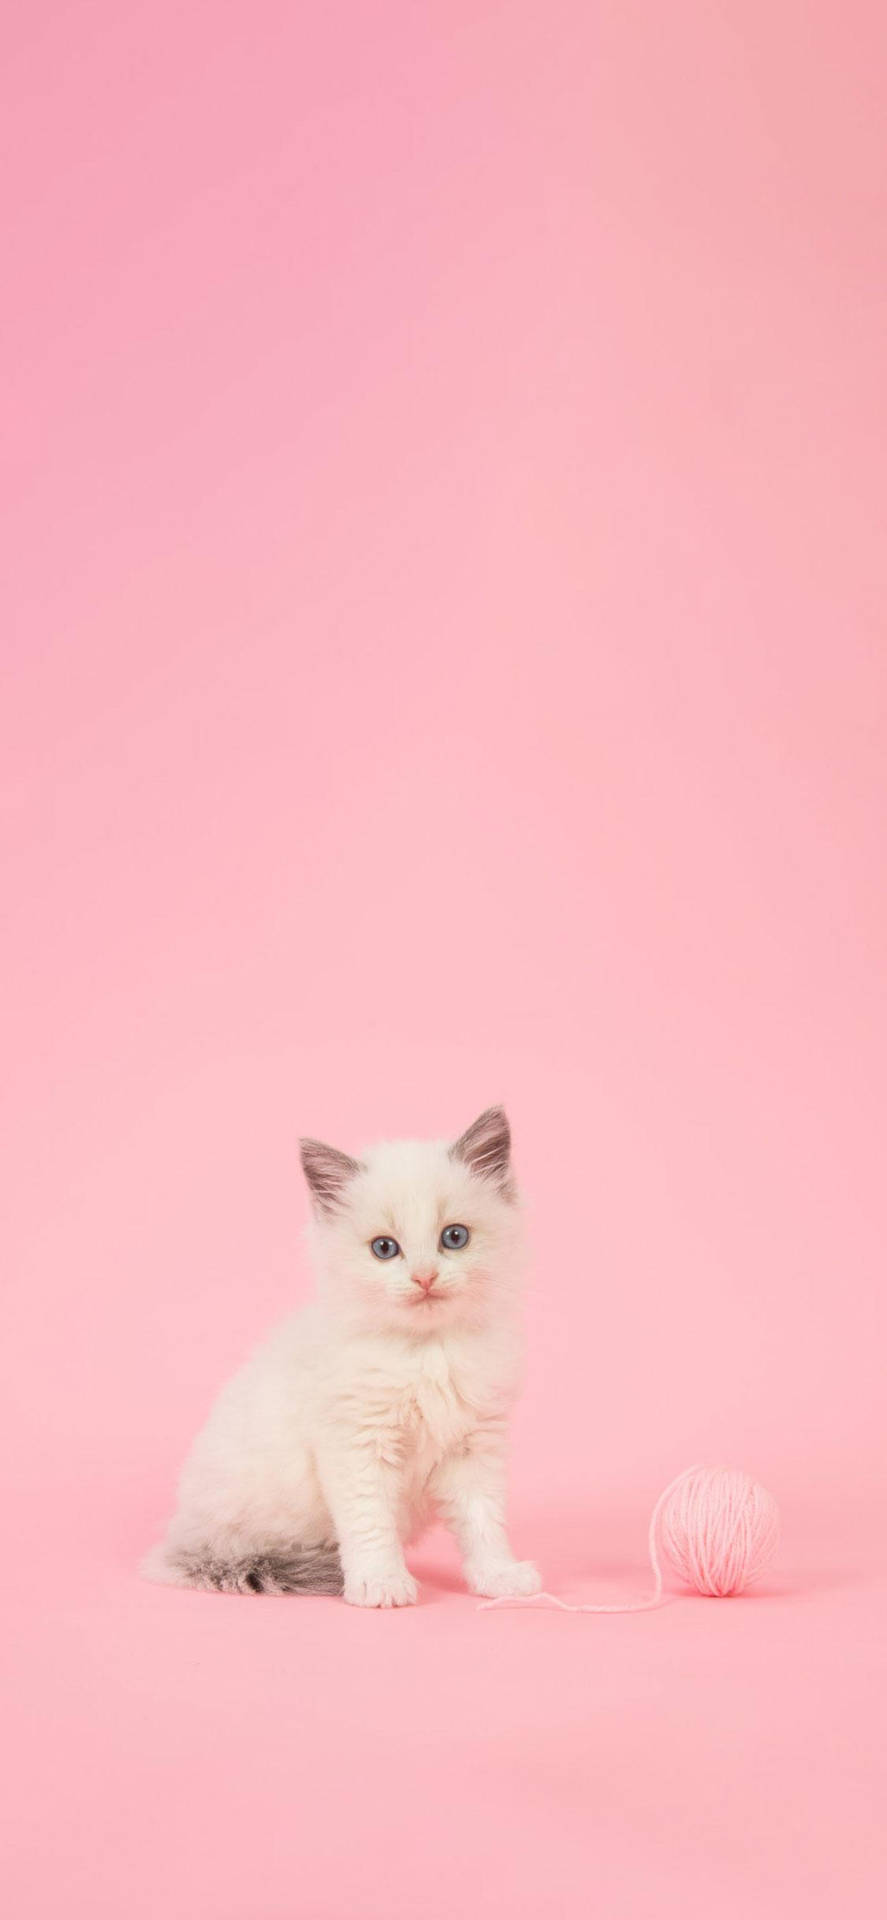 a white kitten sitting on a pink background Wallpaper